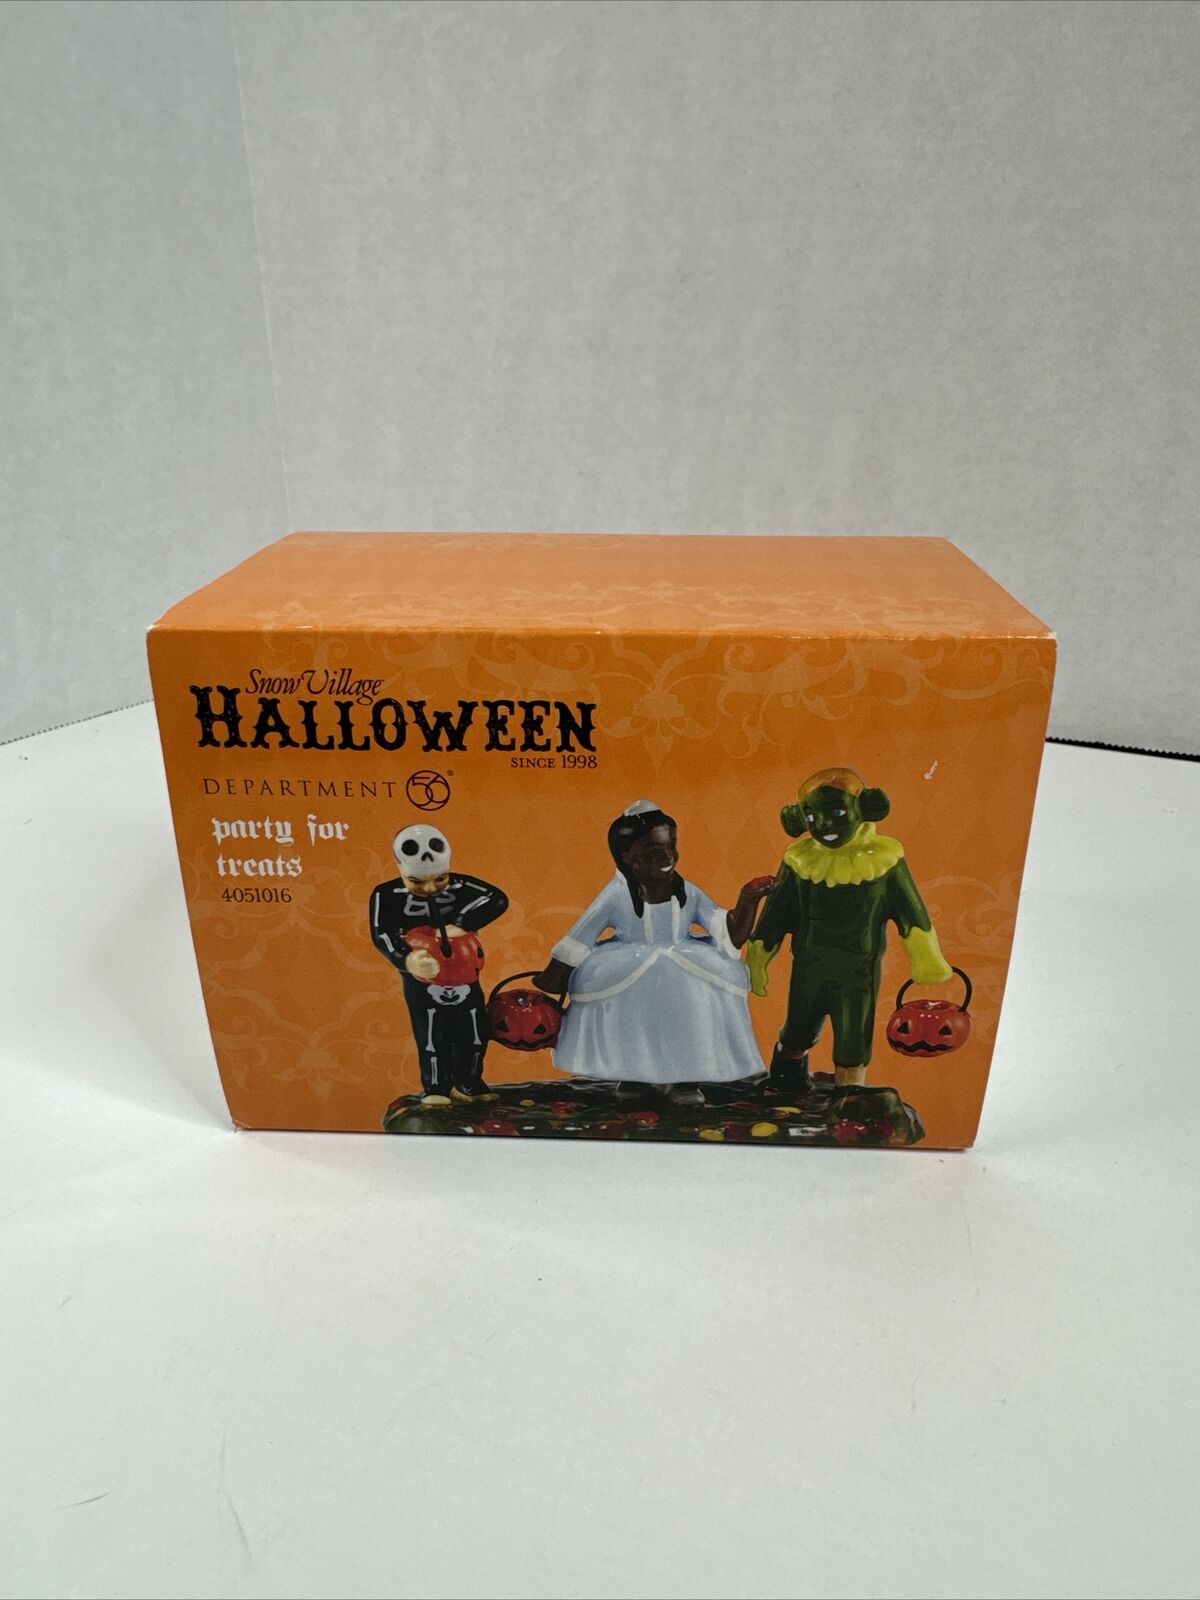 Department 56 Halloween Party For Treats Figurine Snow Village Retired Very Rare